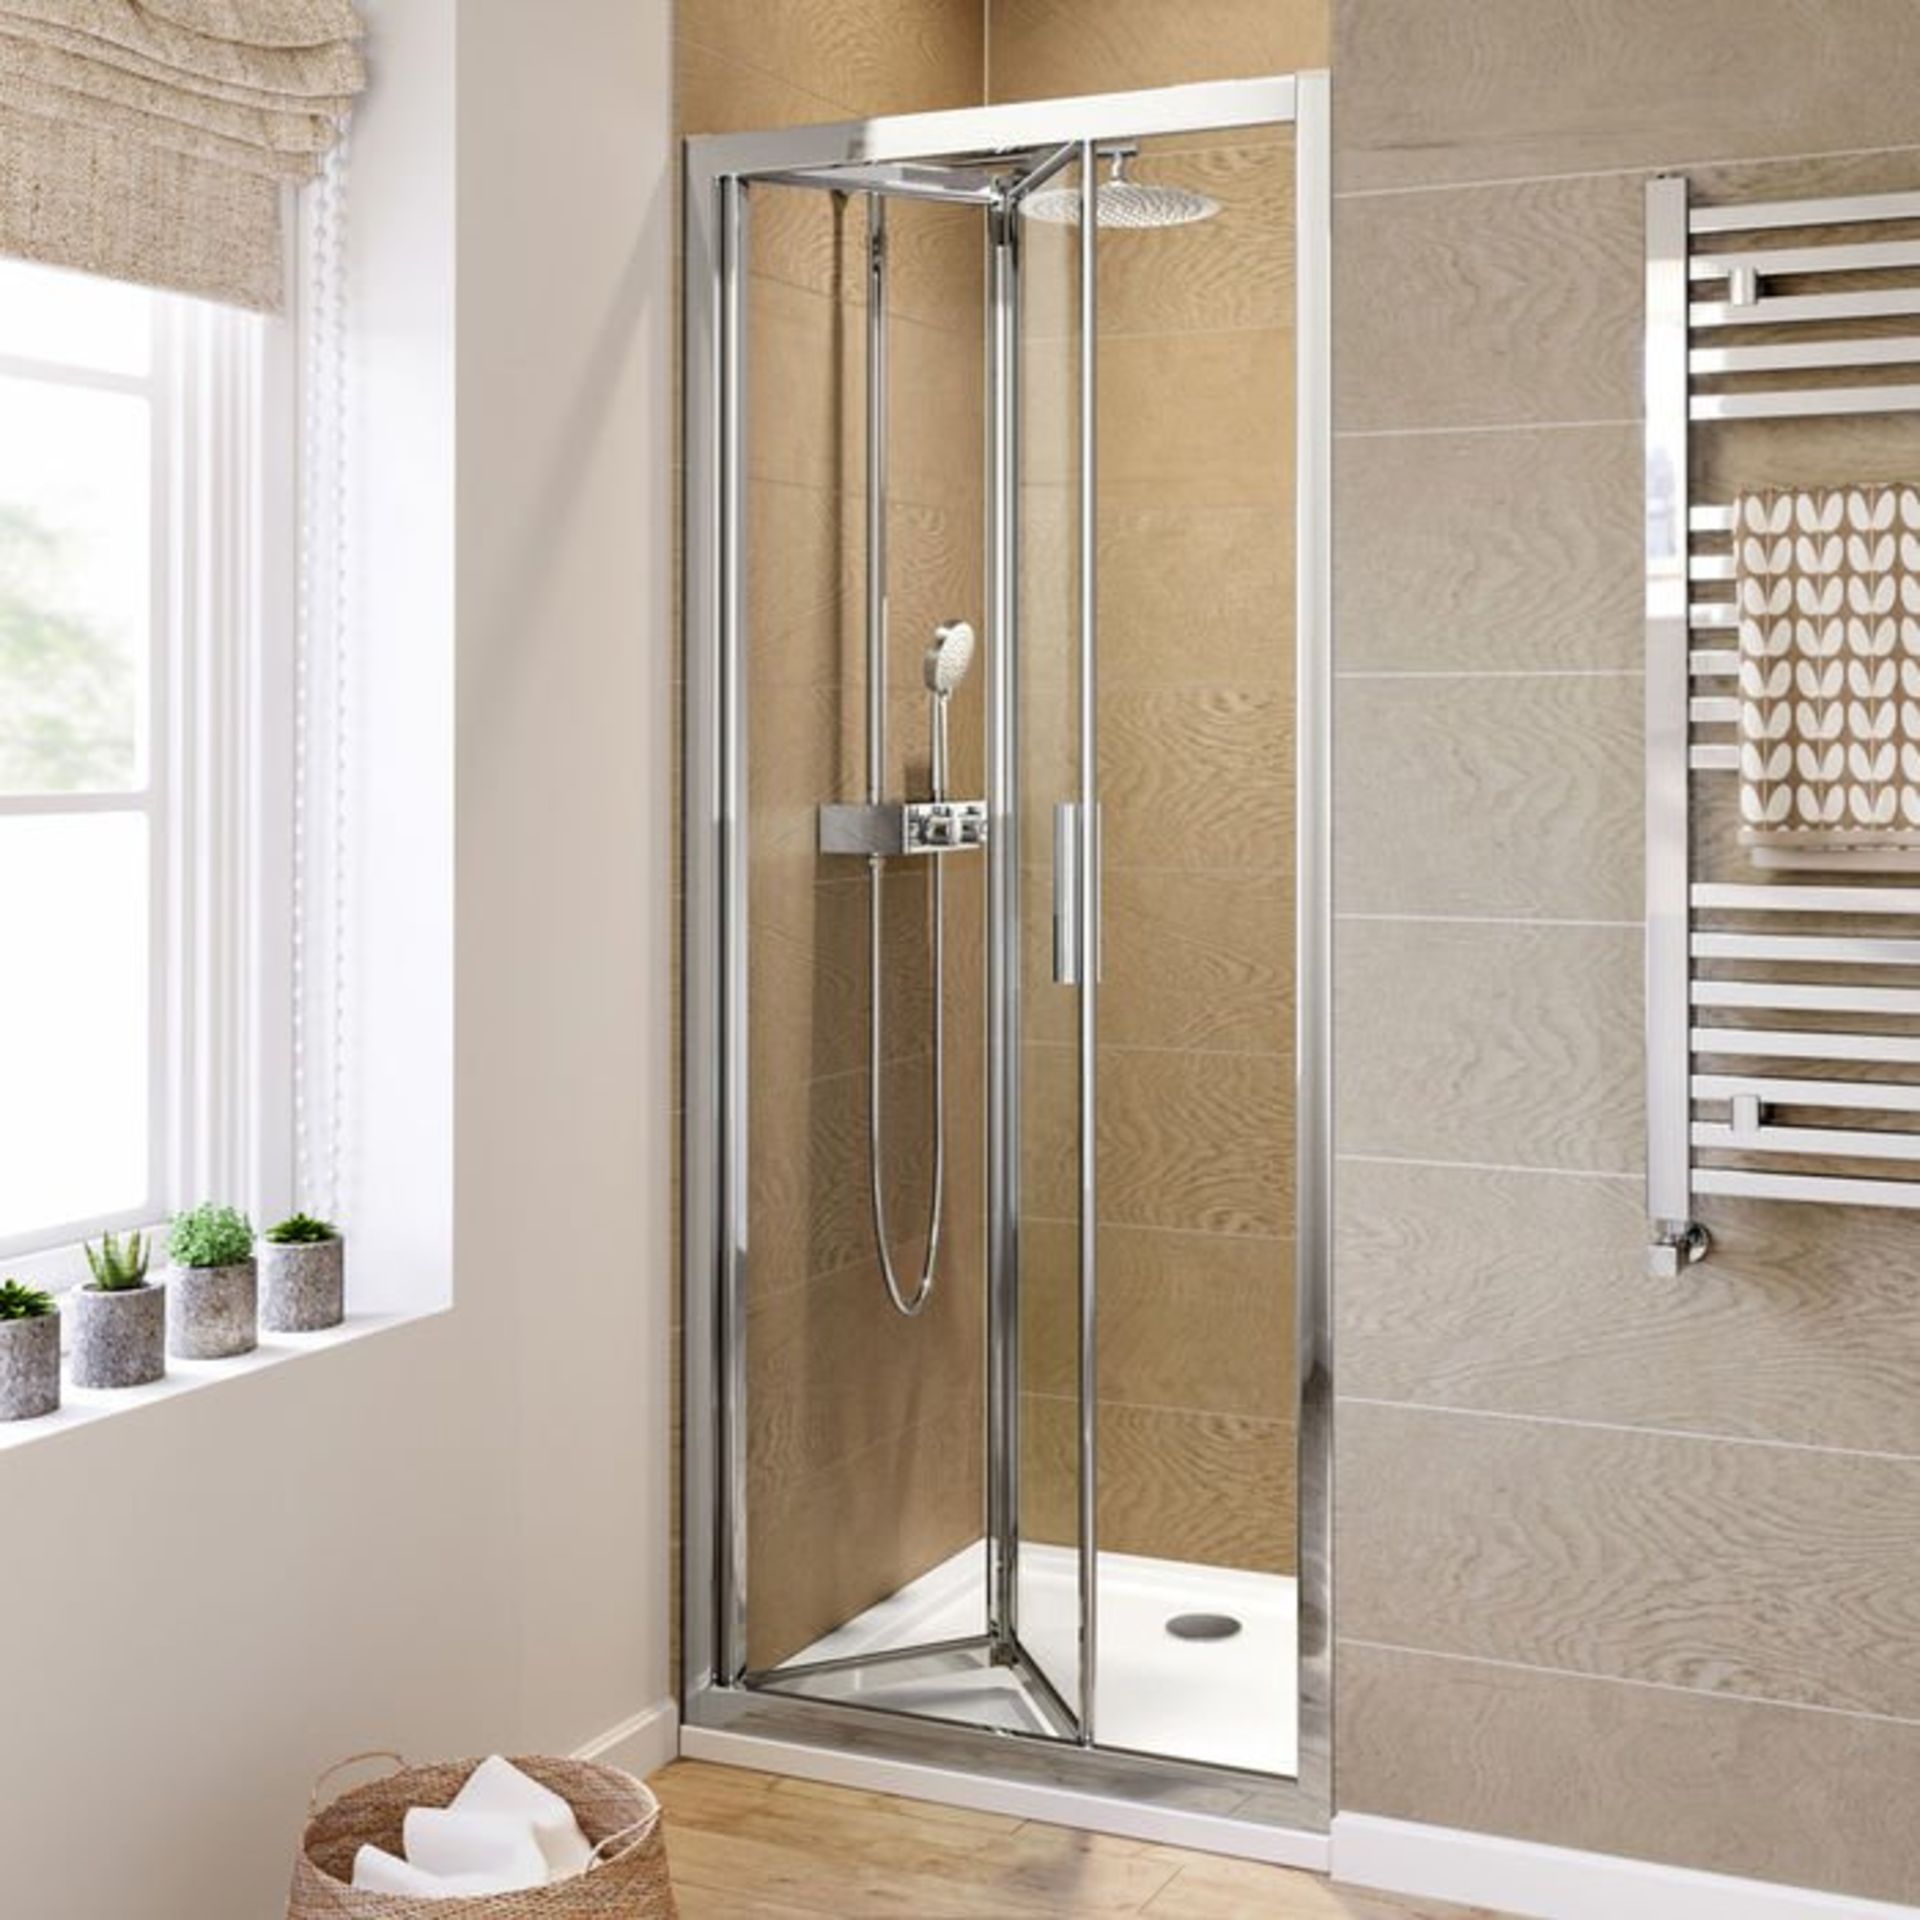 (H237) 1000mm - 6mm - Elements EasyClean Bifold Shower Door. RRP £299.99. 6mm Safety Glass - - Image 3 of 3